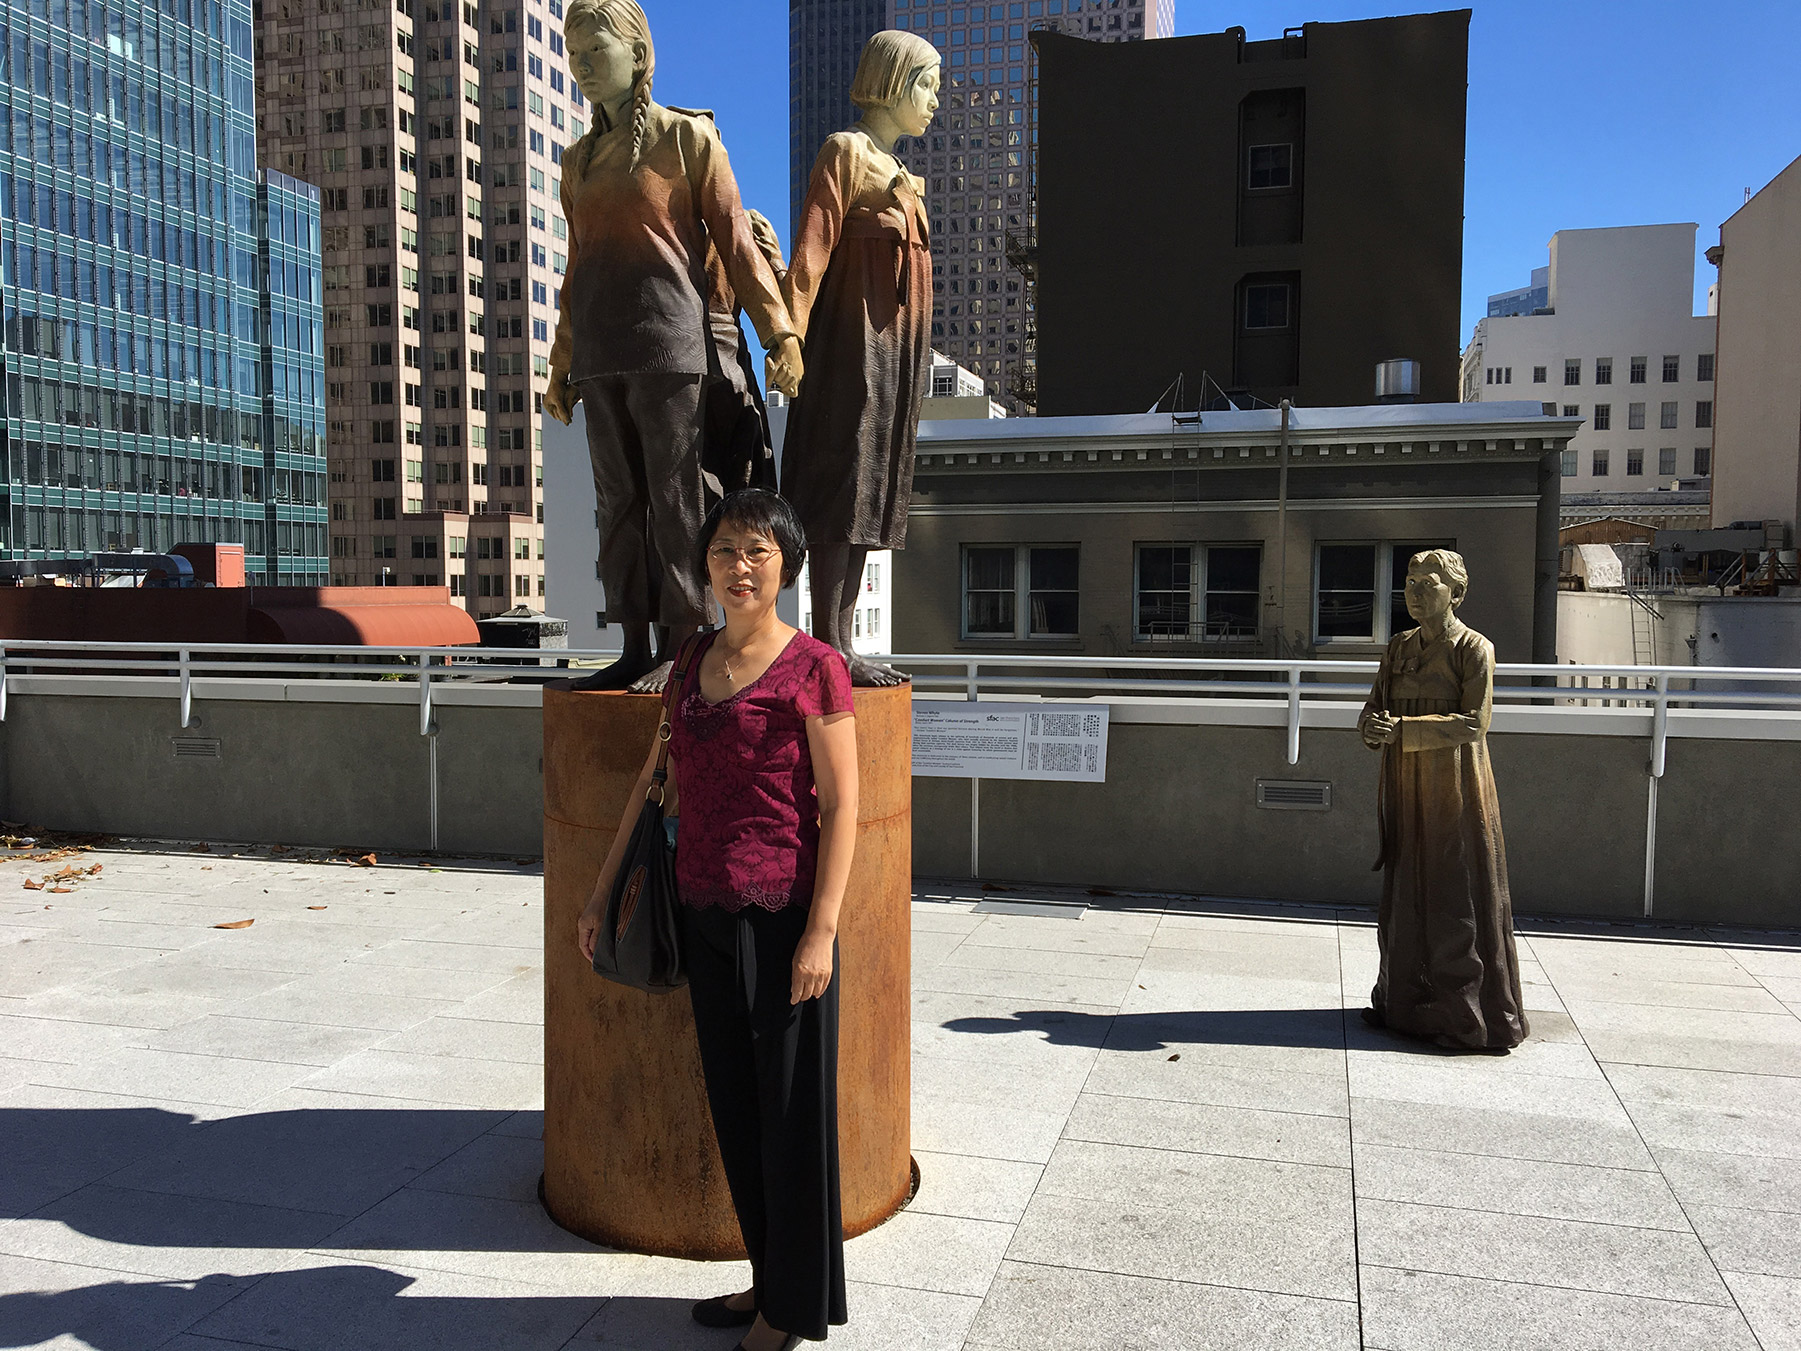 Person posing on a city rooftop in front of three bronze statues of people in different poses.